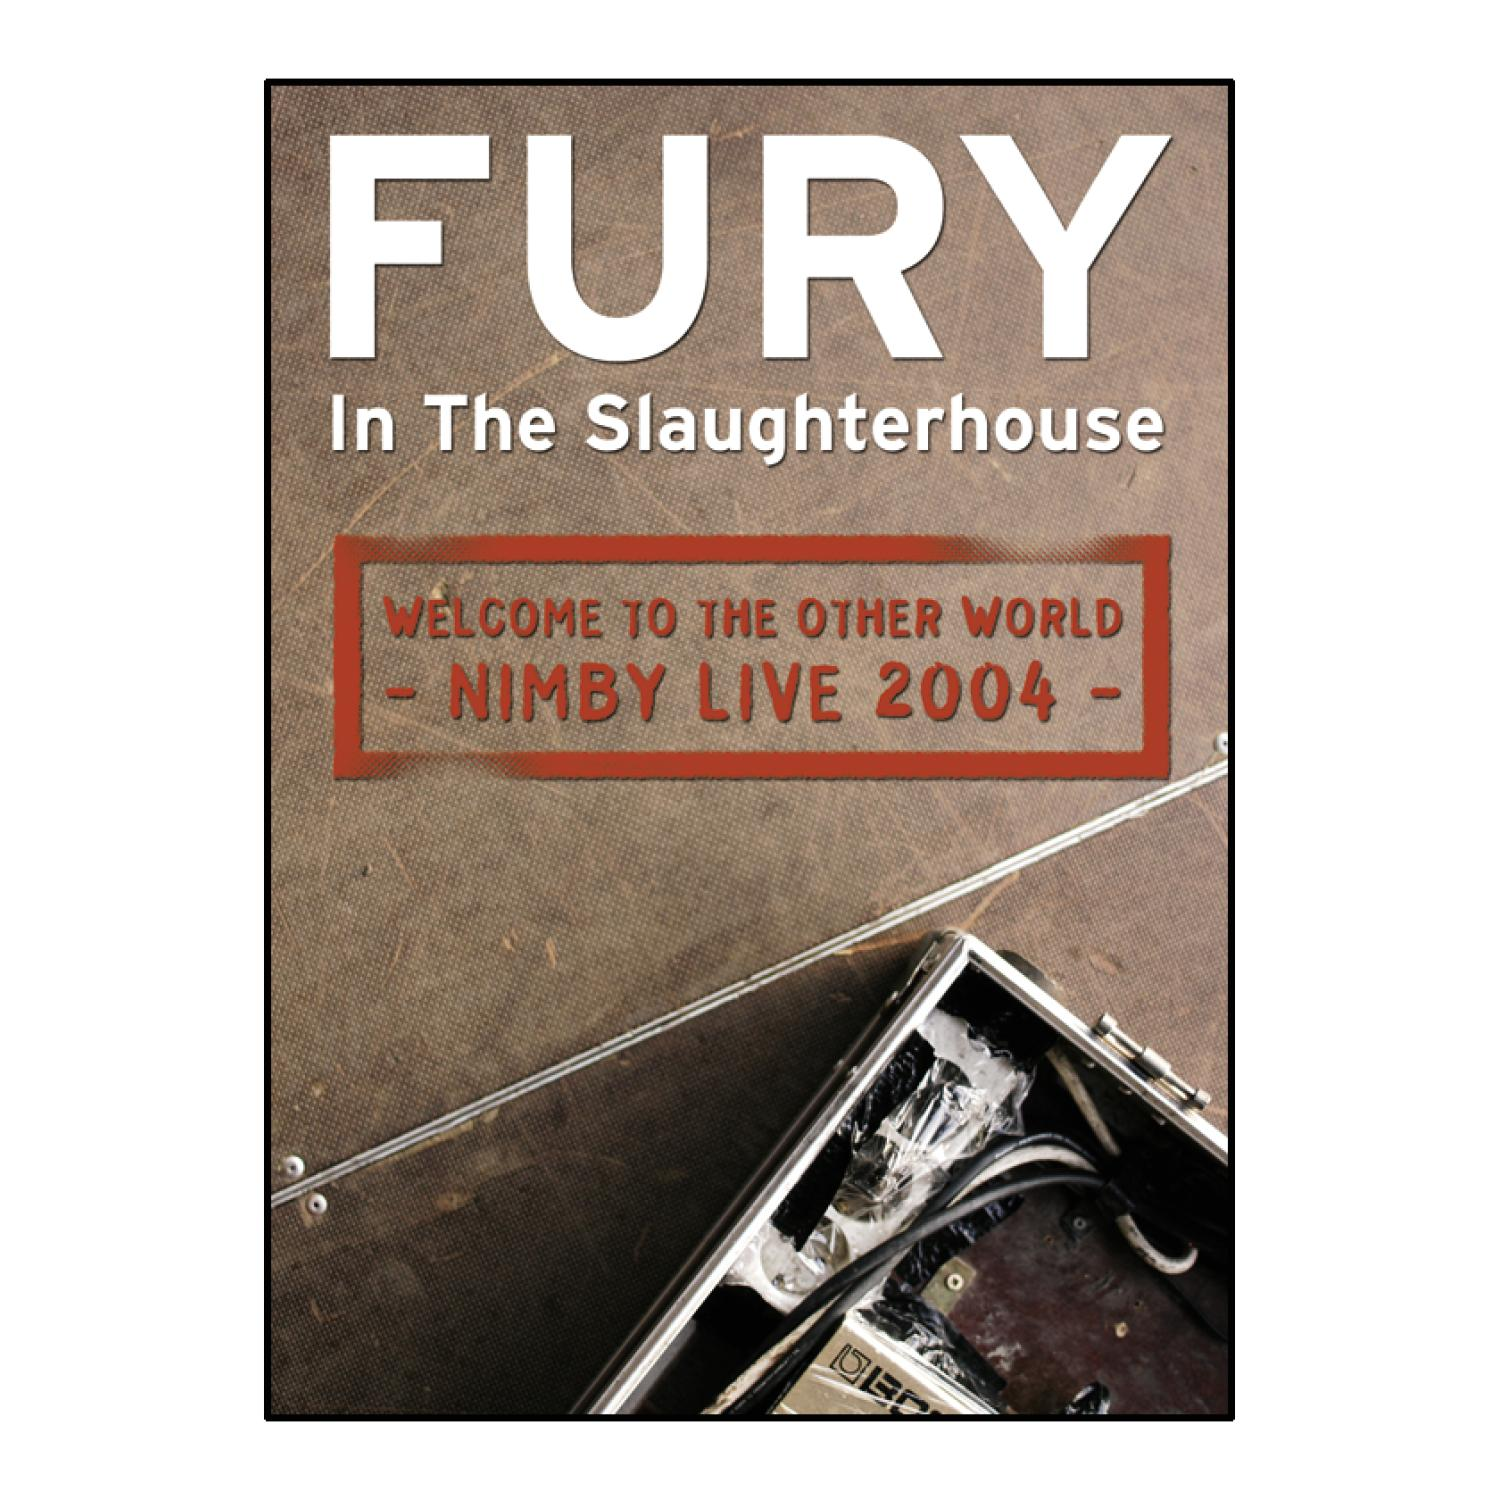 Fury in the Slaughterhouse - Welcome in NIMBY - – (DVD) live 2004 The Other Fury - To Slaughterhouse World the